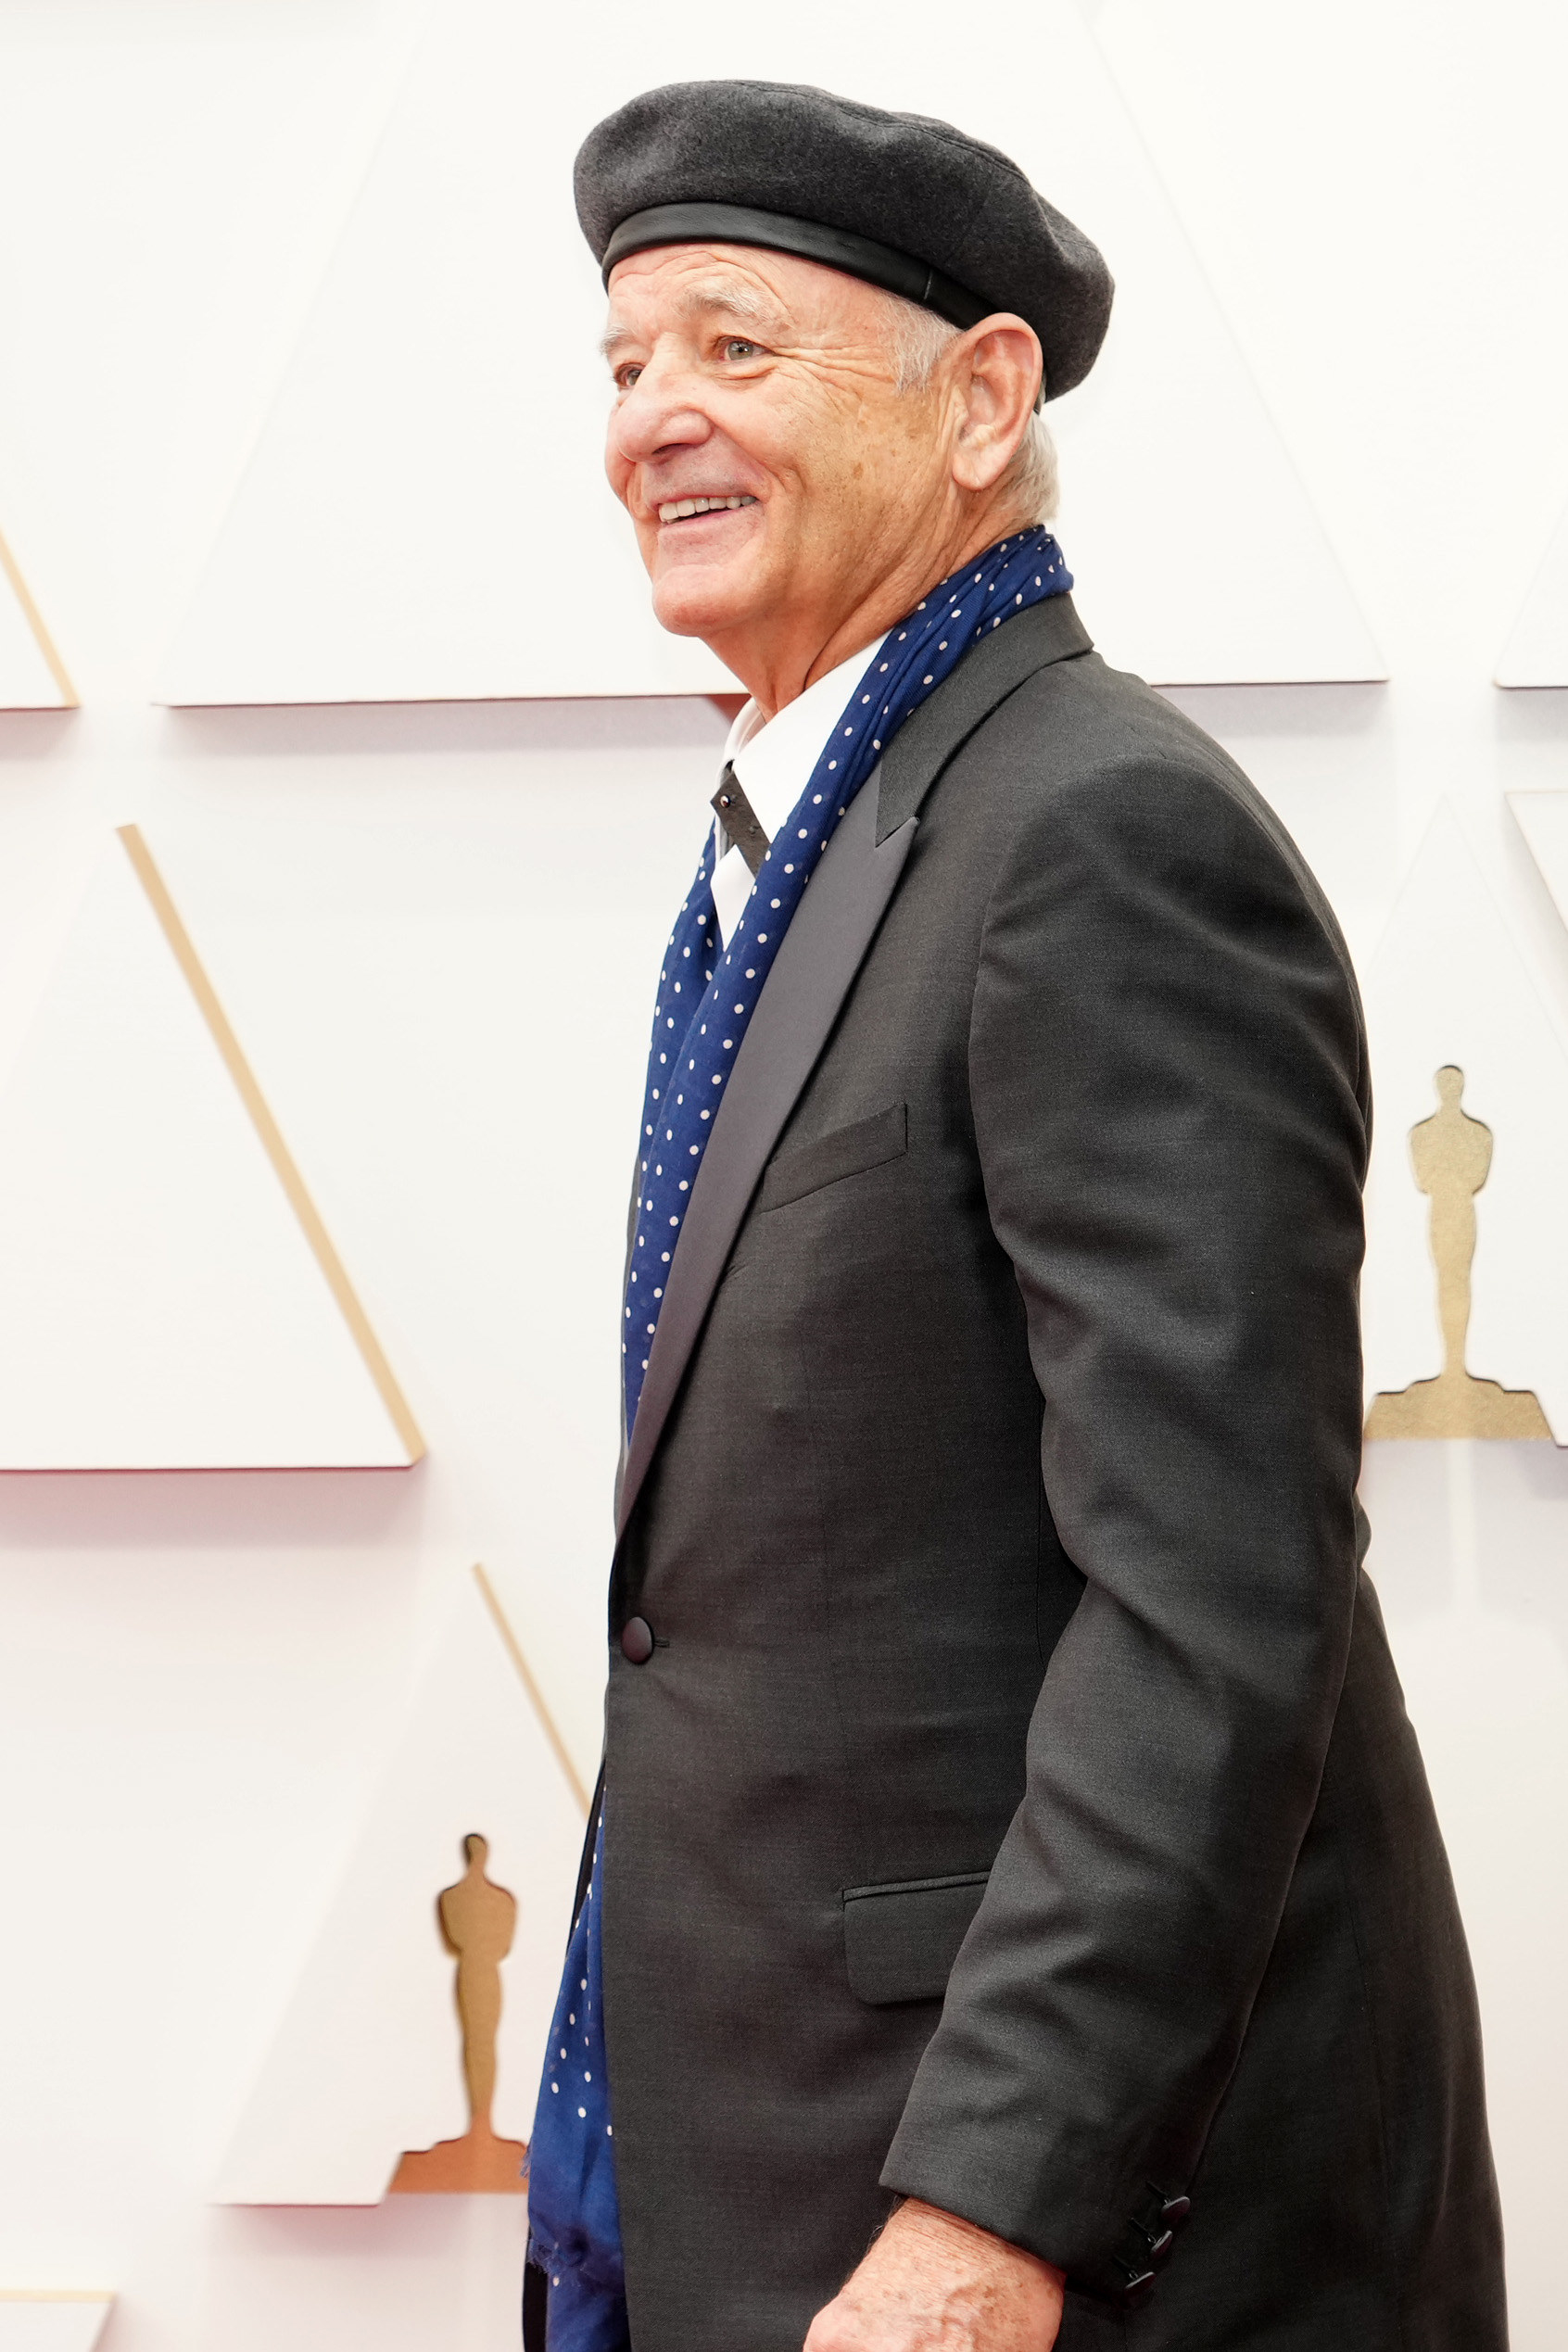 Bill Murray walks the Oscars red carpet in a beret wearing a suit